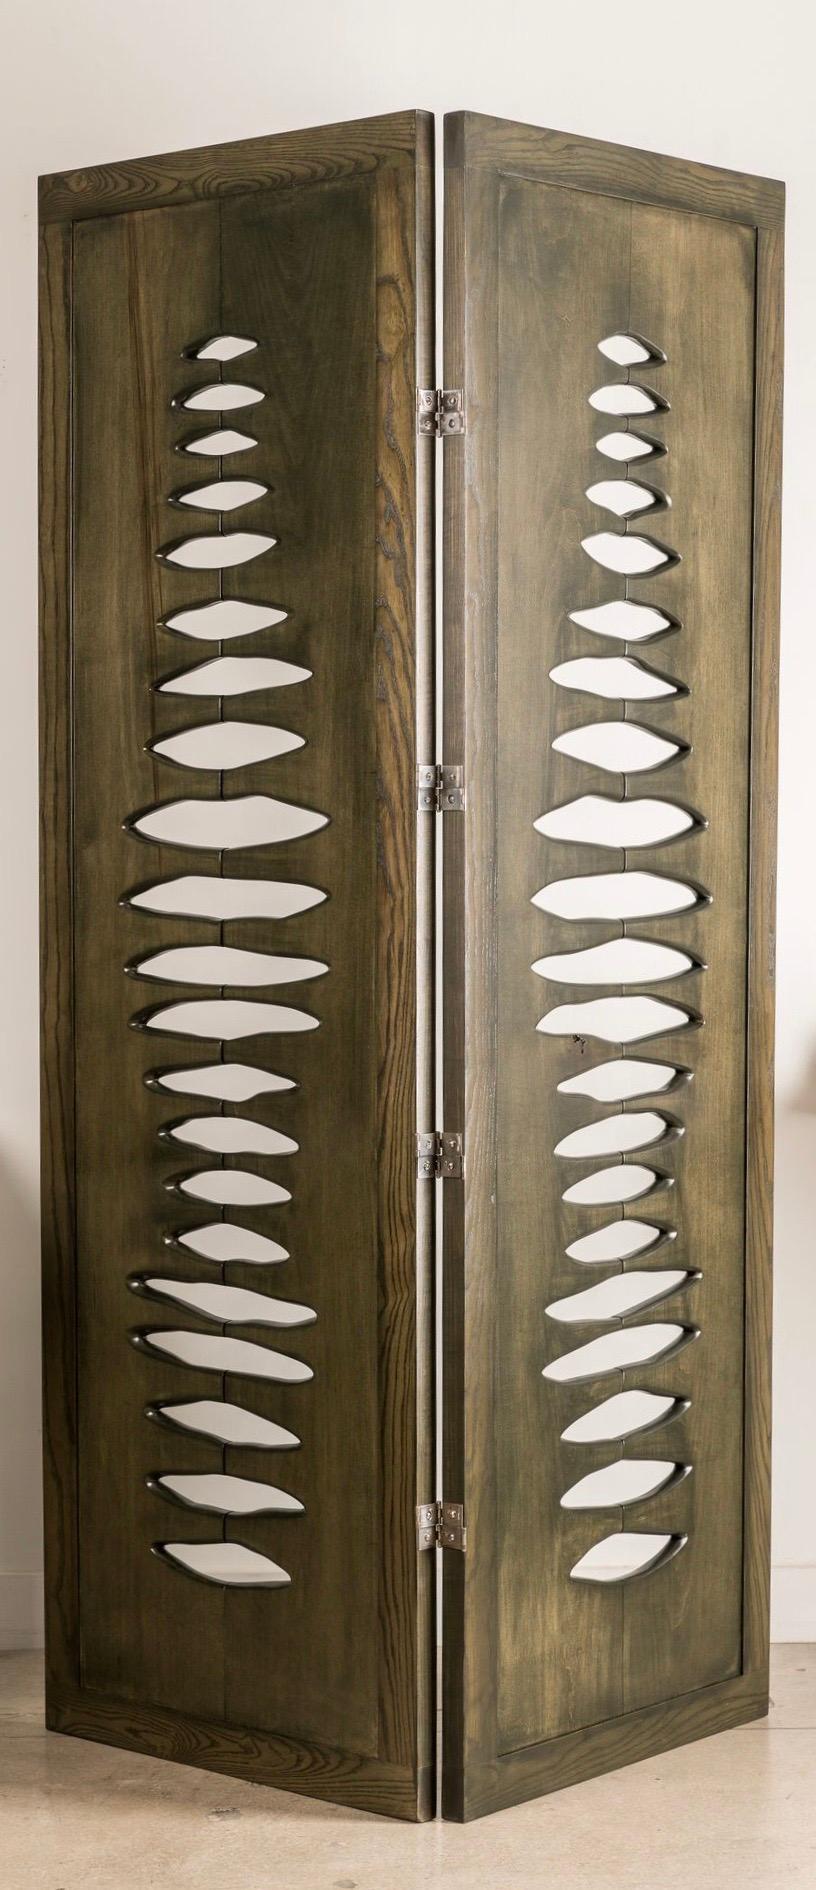 American Contemporary Sculptural Screen Space Divider in Solid Wood by Vivian Carbonell For Sale